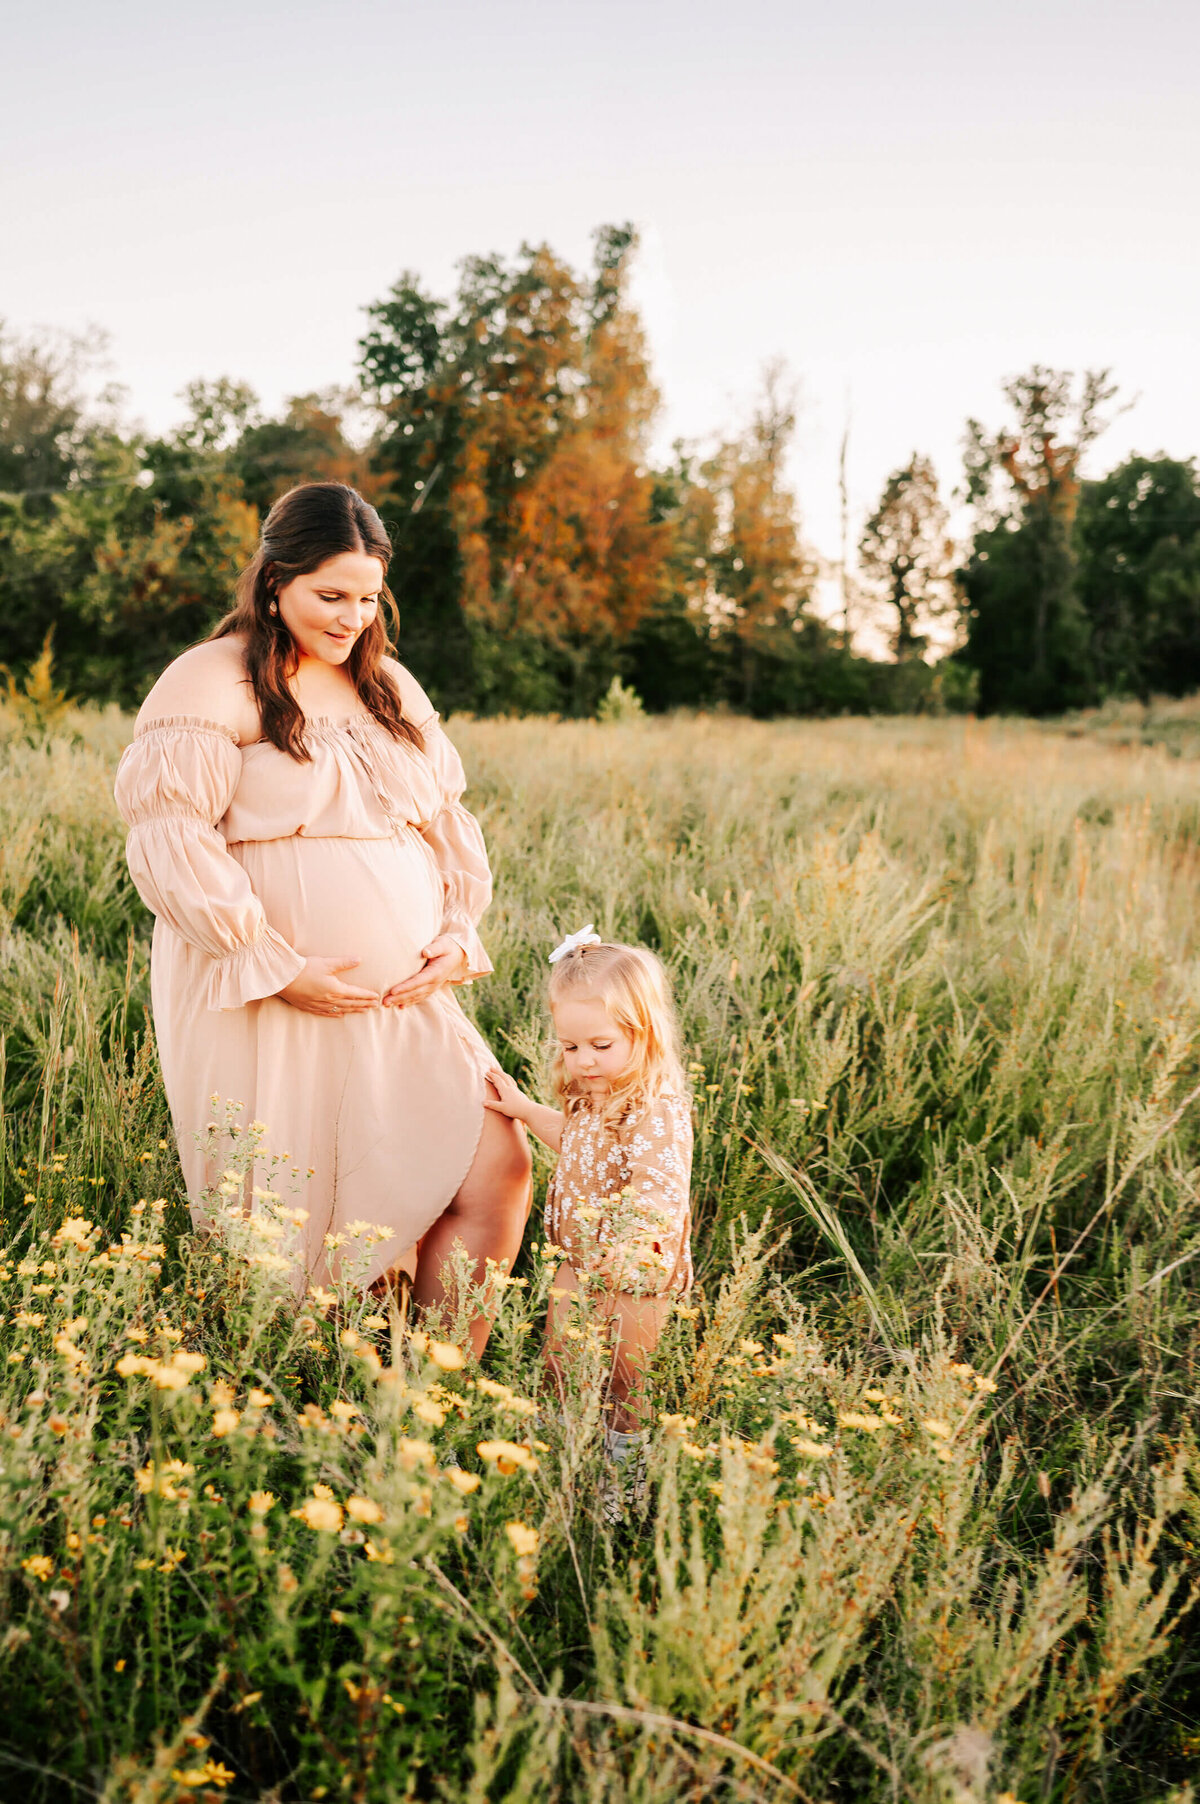 Branson Missouri maternity photographer Jessica Kennedy of The XO Photography captures pregnant mom and toddler picking flowers in a field